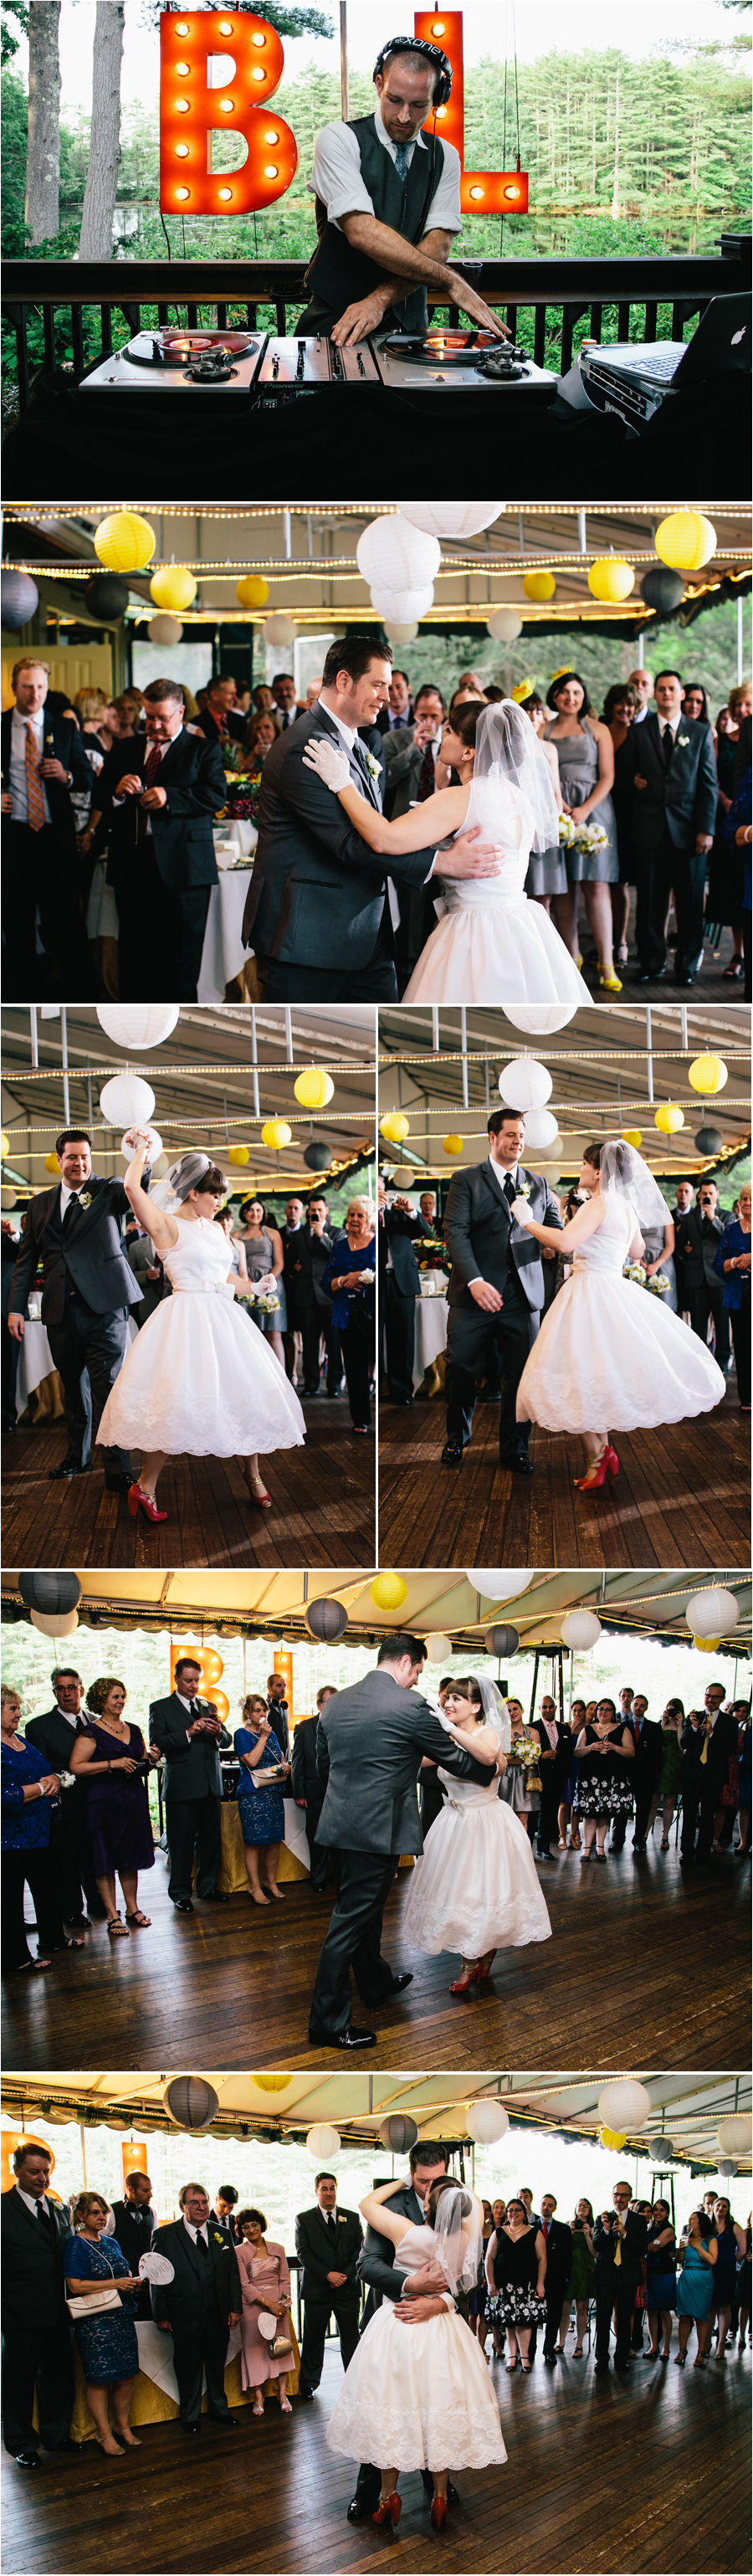 Whispering Pines Wedding First Dance Laura & Brian   Whispering Pines Wedding Photographer